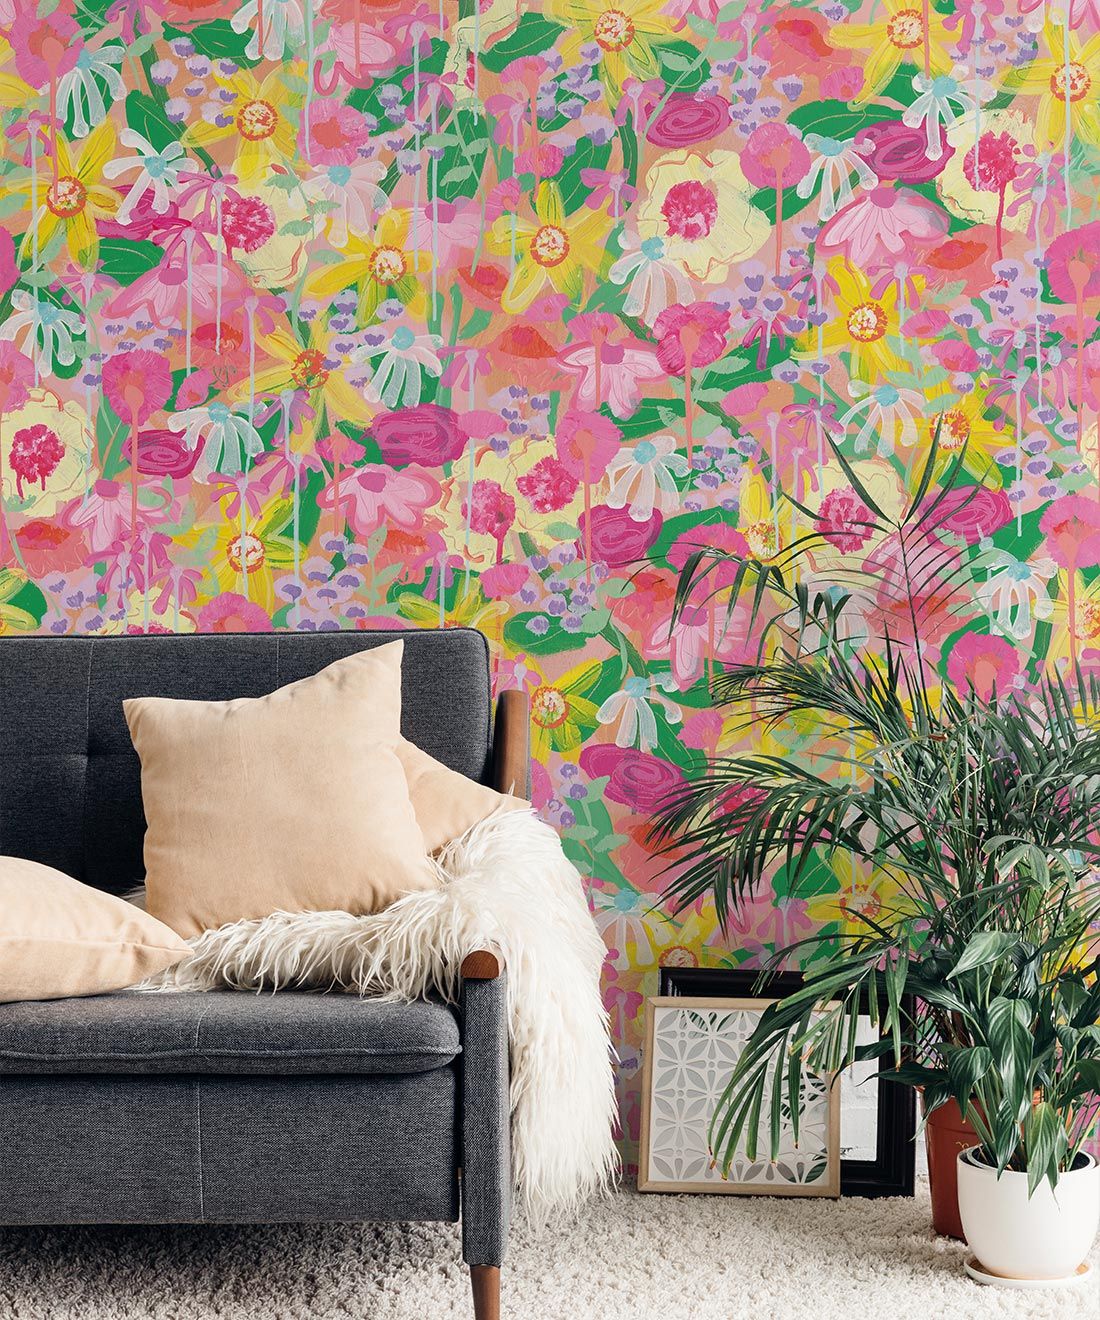 Homestead Wallpaper • Tiff Manuell • Colorful Floral Wallpaper • Insitu With sofa